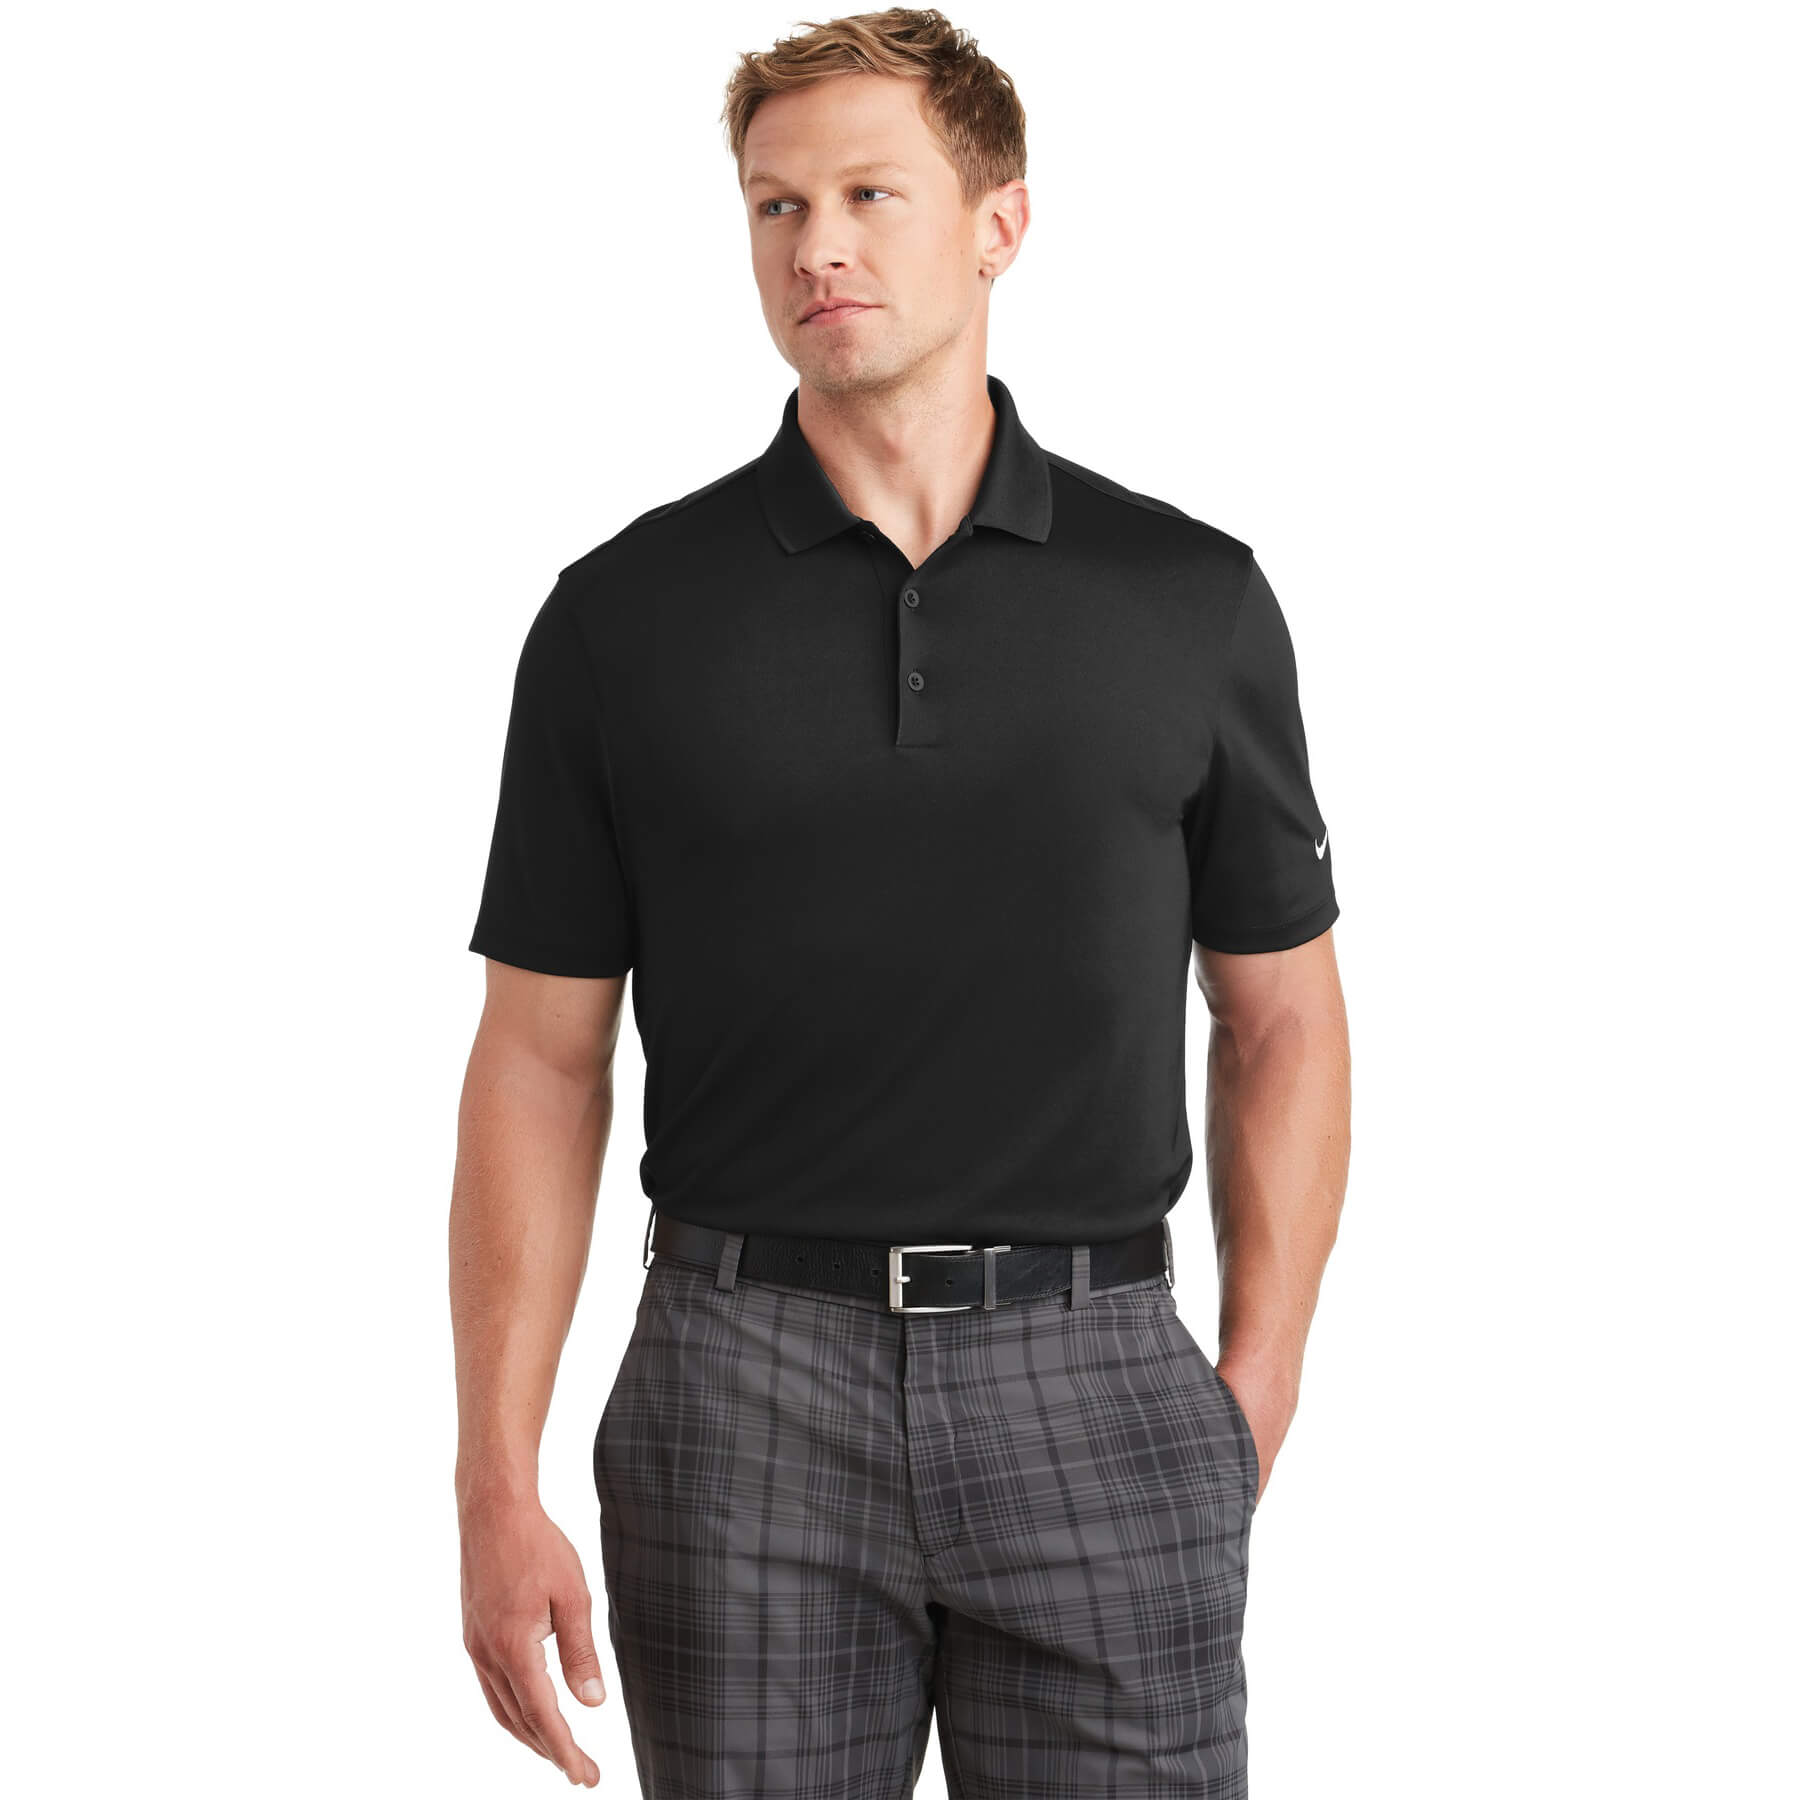 Nike Golf Dri-FIT Players Polo with Flat Knit Collar - Phelps USA